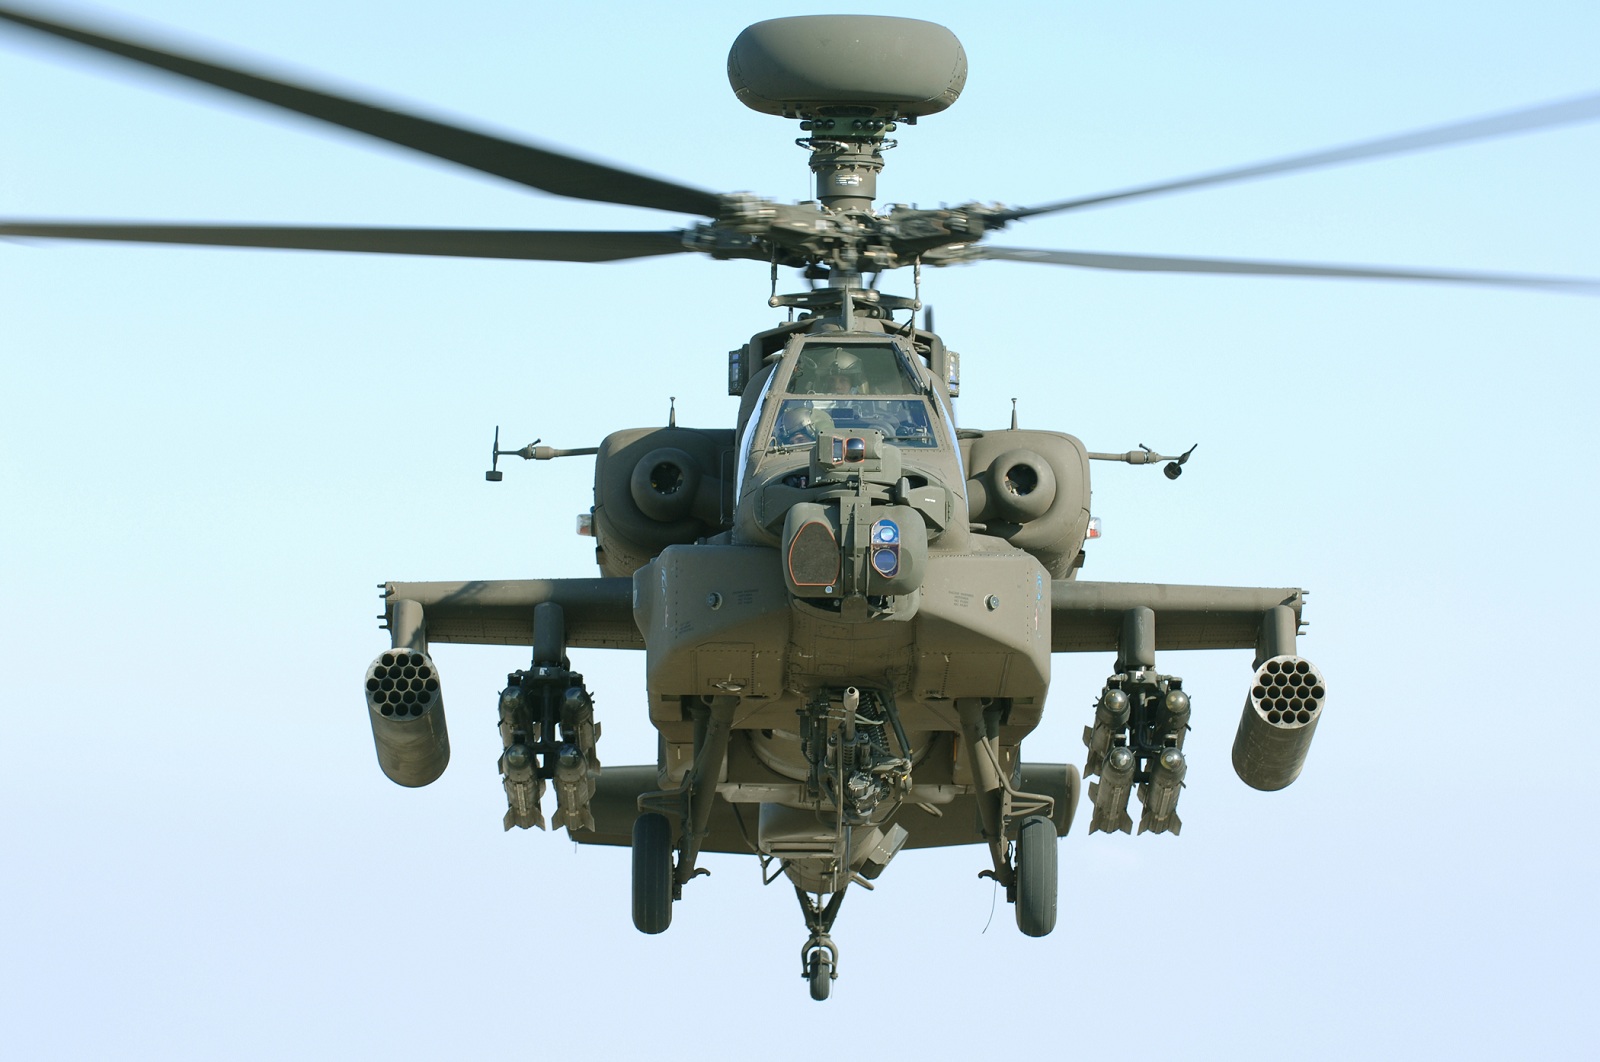 Naval Open Source INTelligence: Army orders 84 advanced helicopters